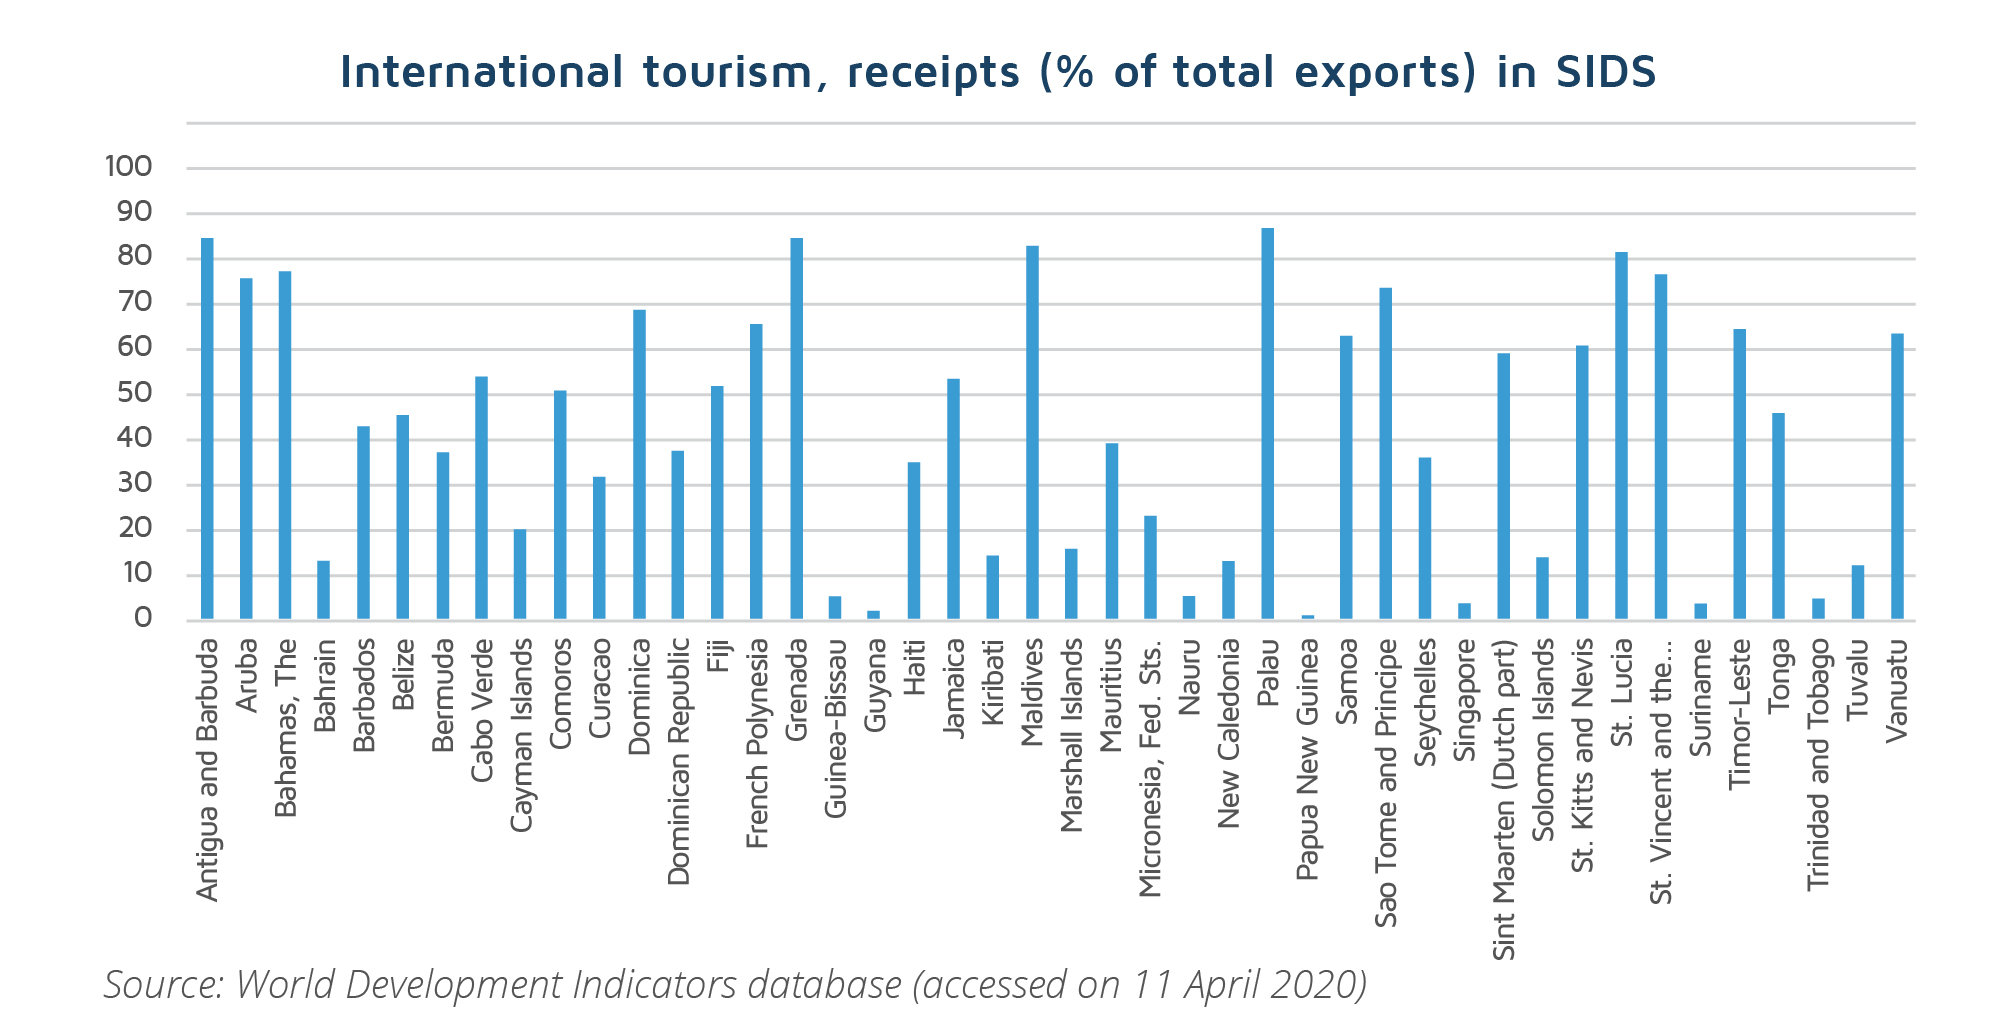 International tourism, receipts (% of total exports) in SIDS